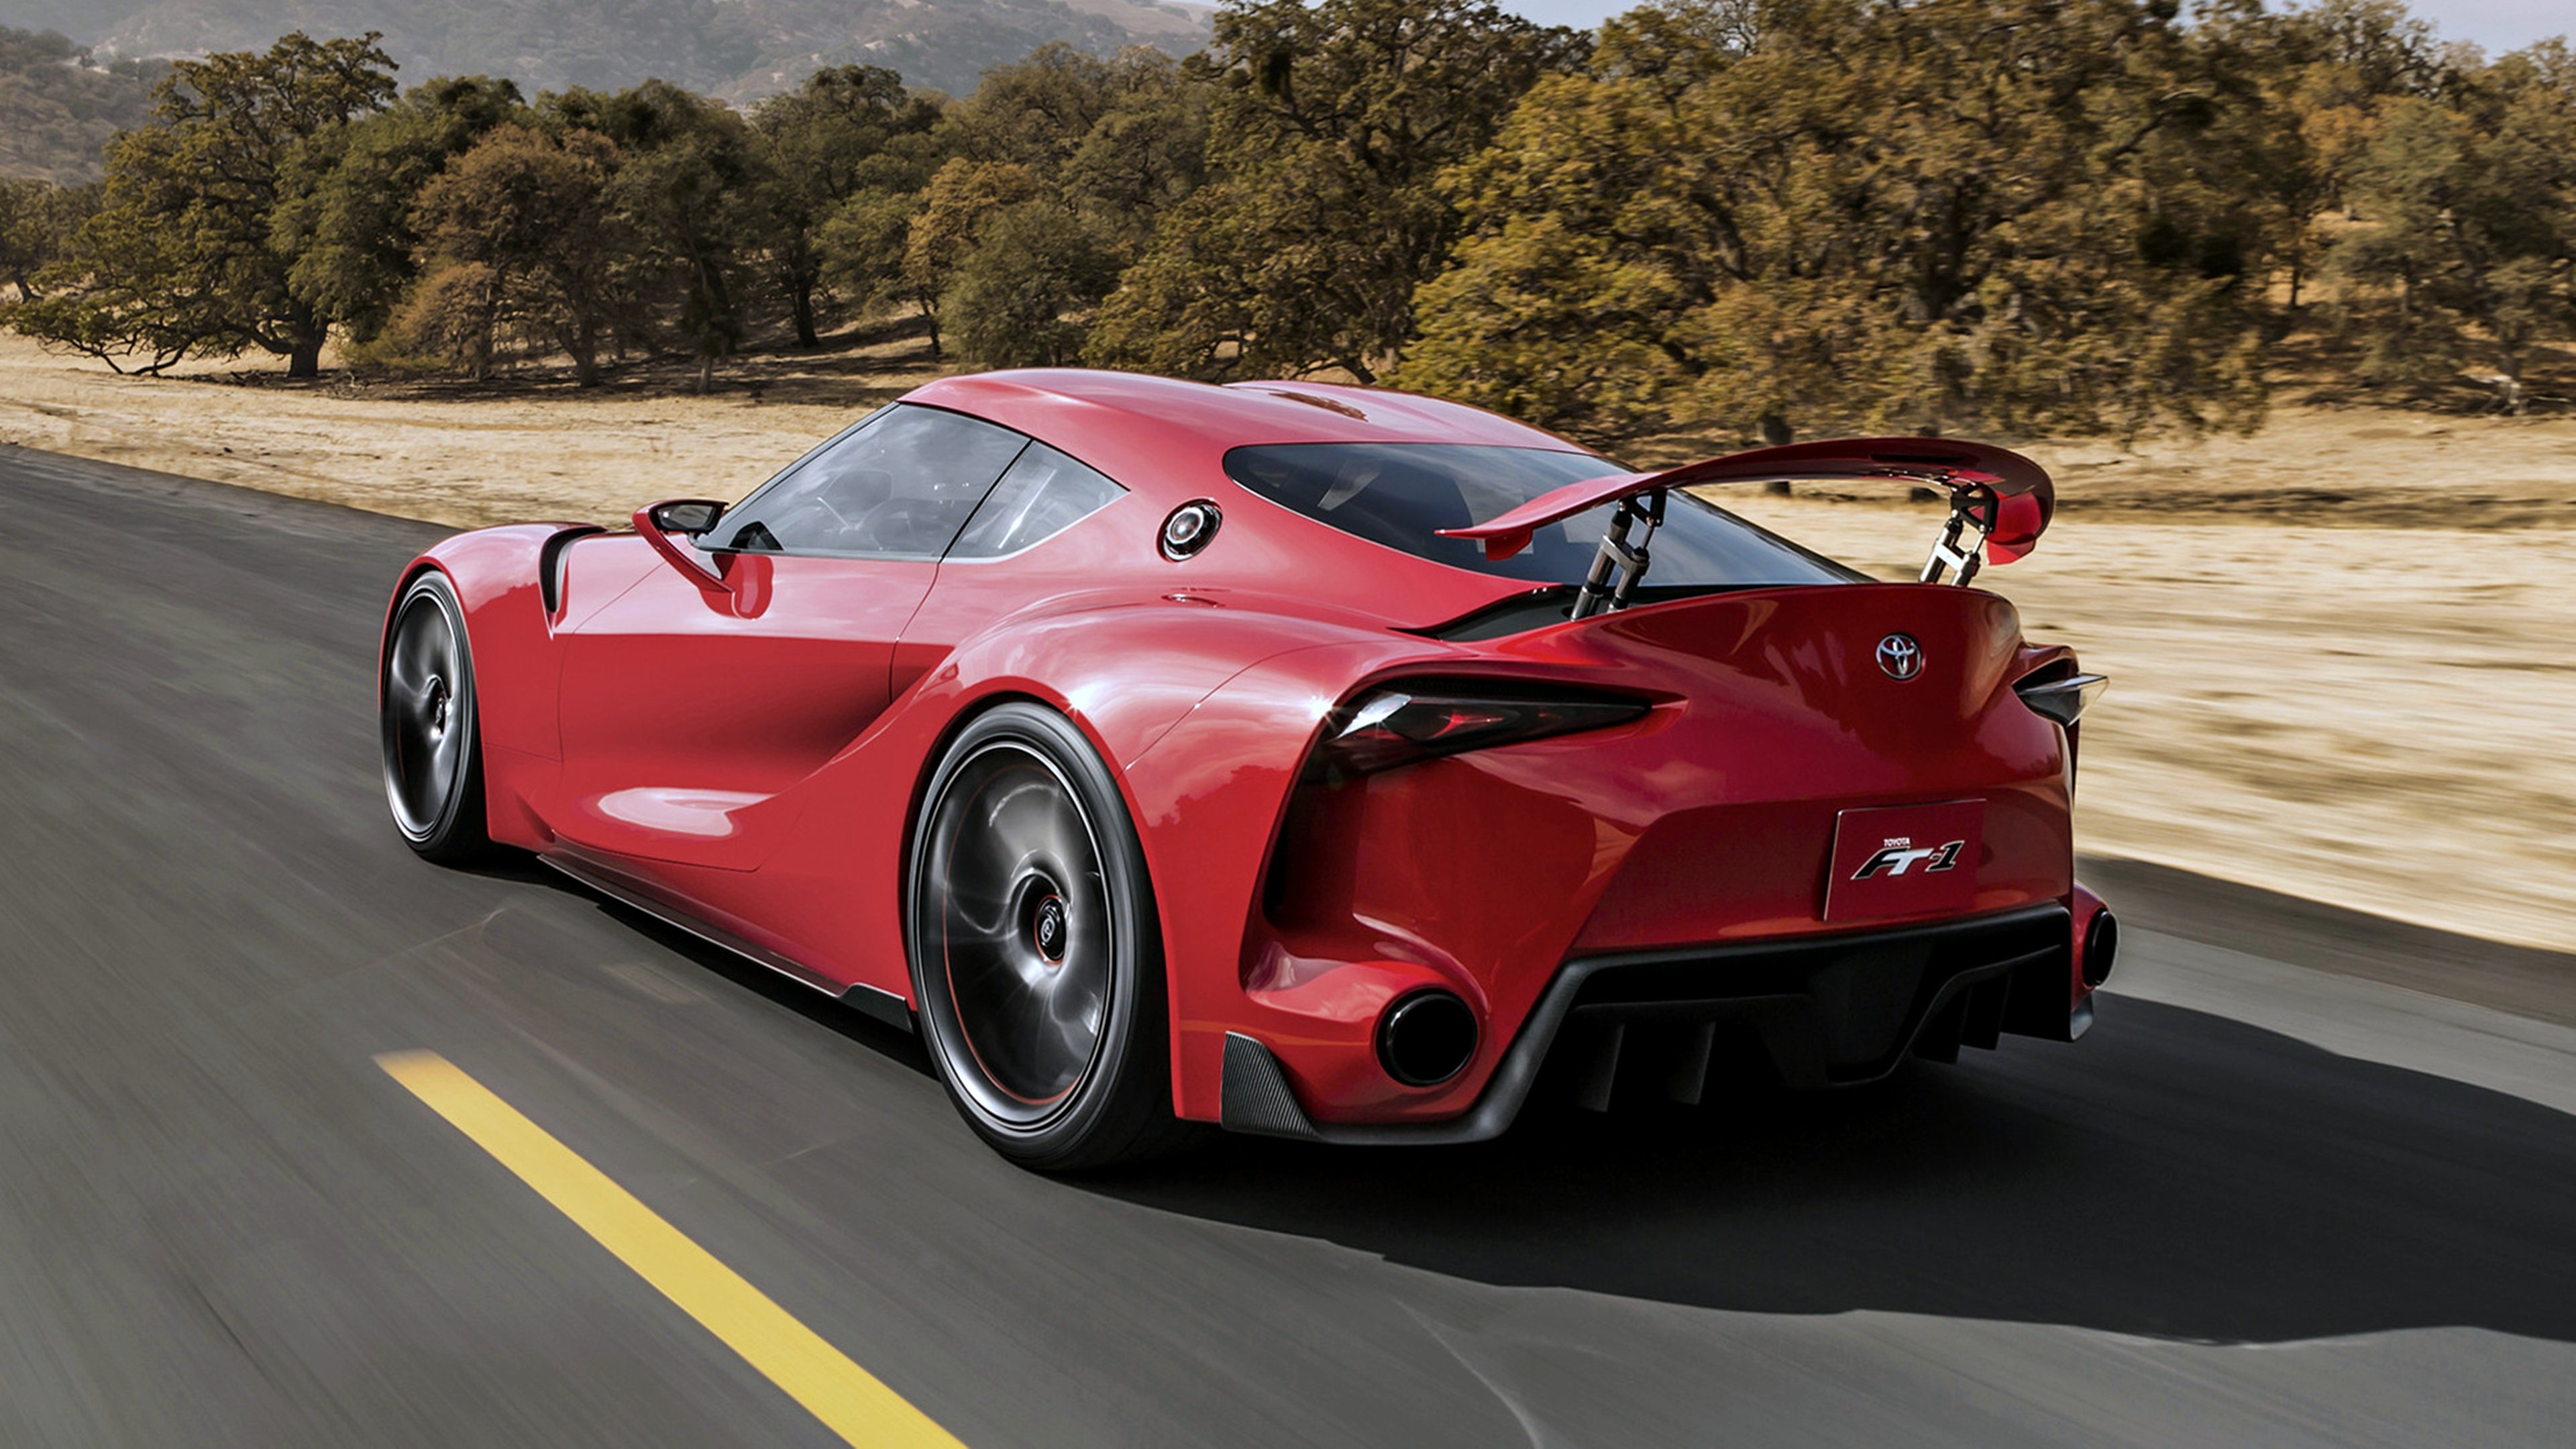 2014, Toyota, Ft 1, Concept, Red, Road, Speed, Race, Supercar, Cars, Motors, Auto, Trees, Landscape Wallpaper